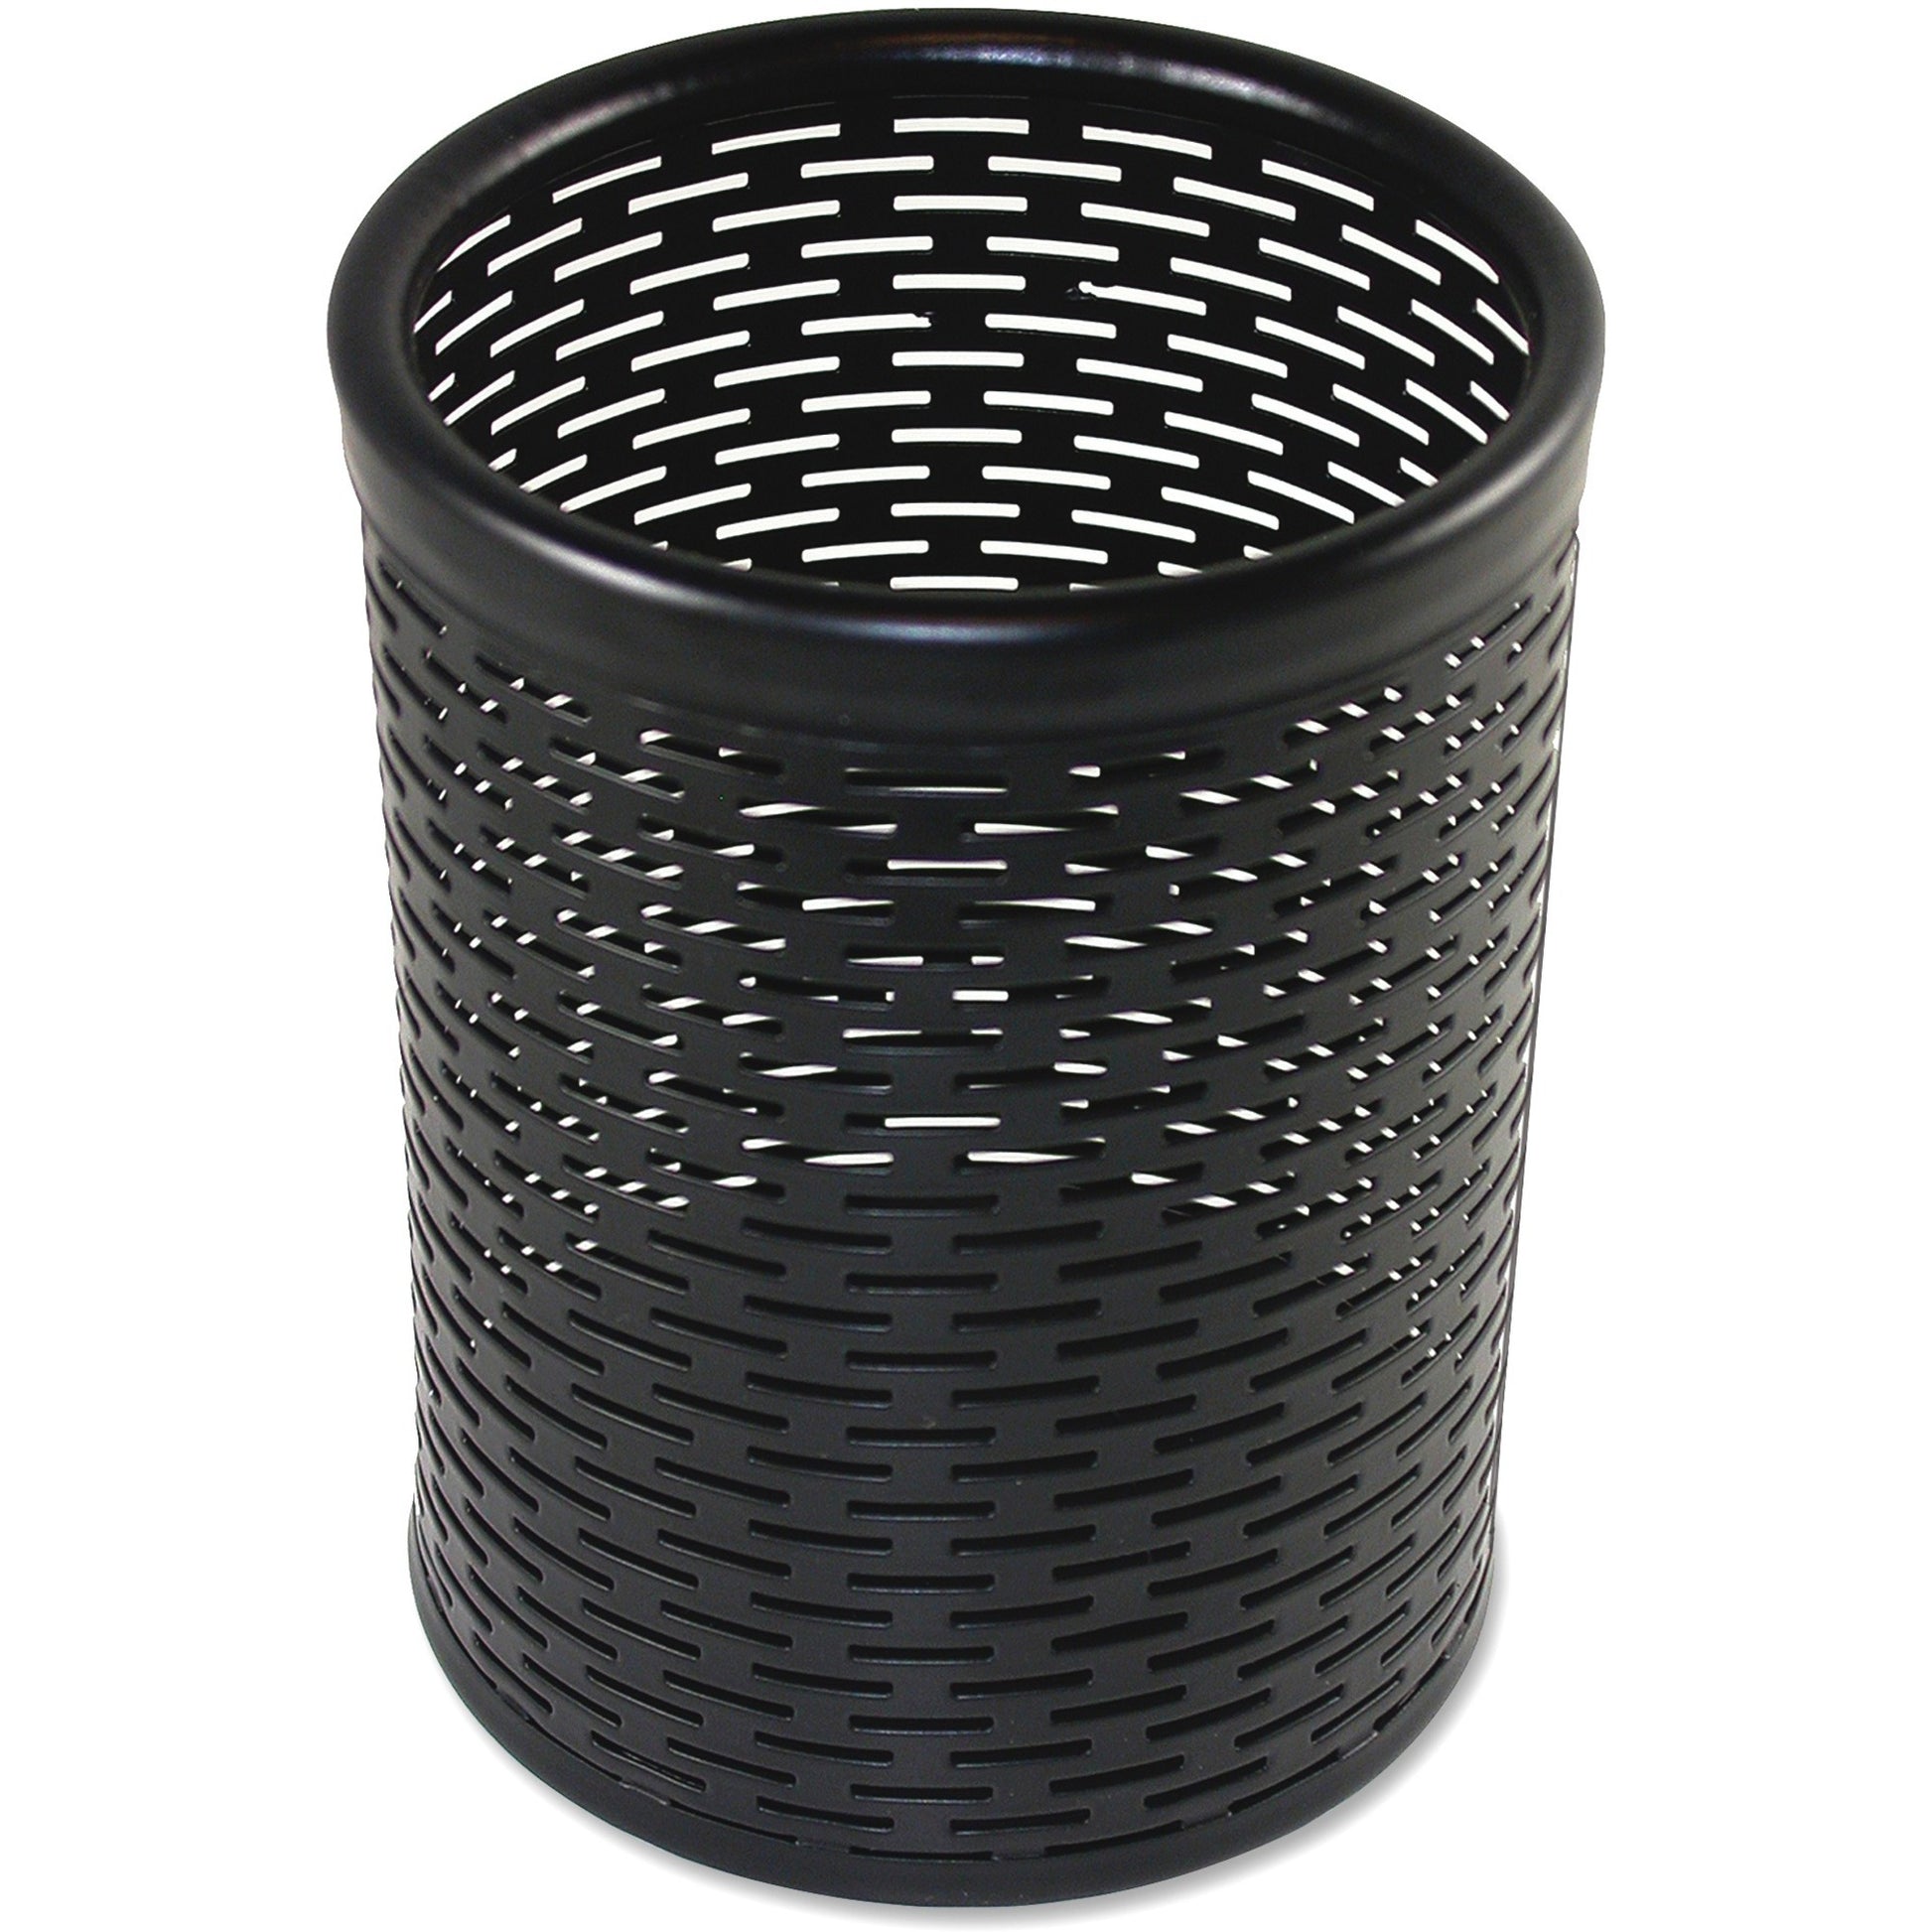 Artistic Urban Collection Punched Metal Pencil Cup